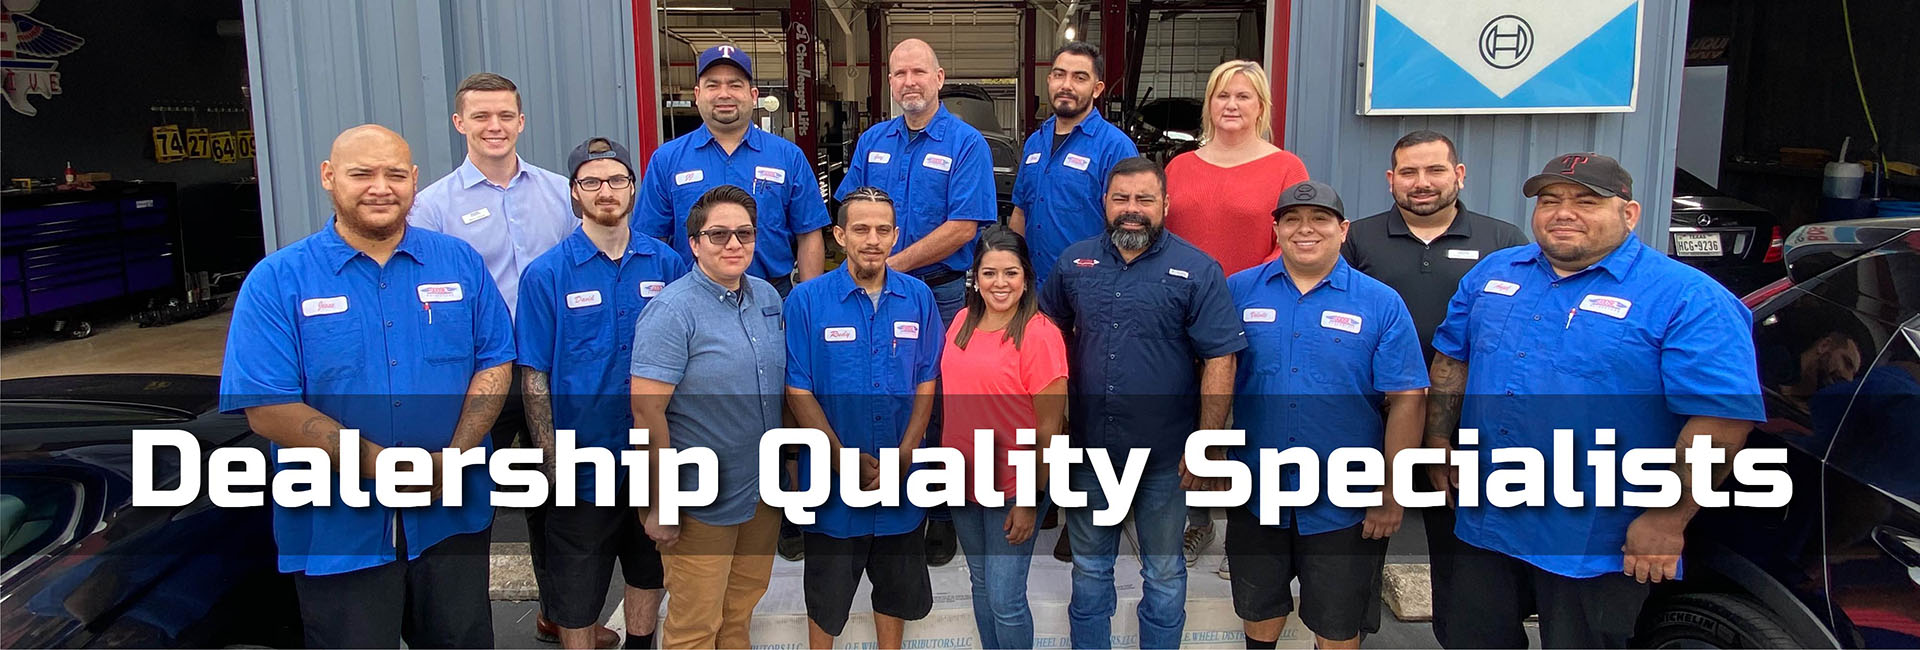 Dealership Quality Specialists